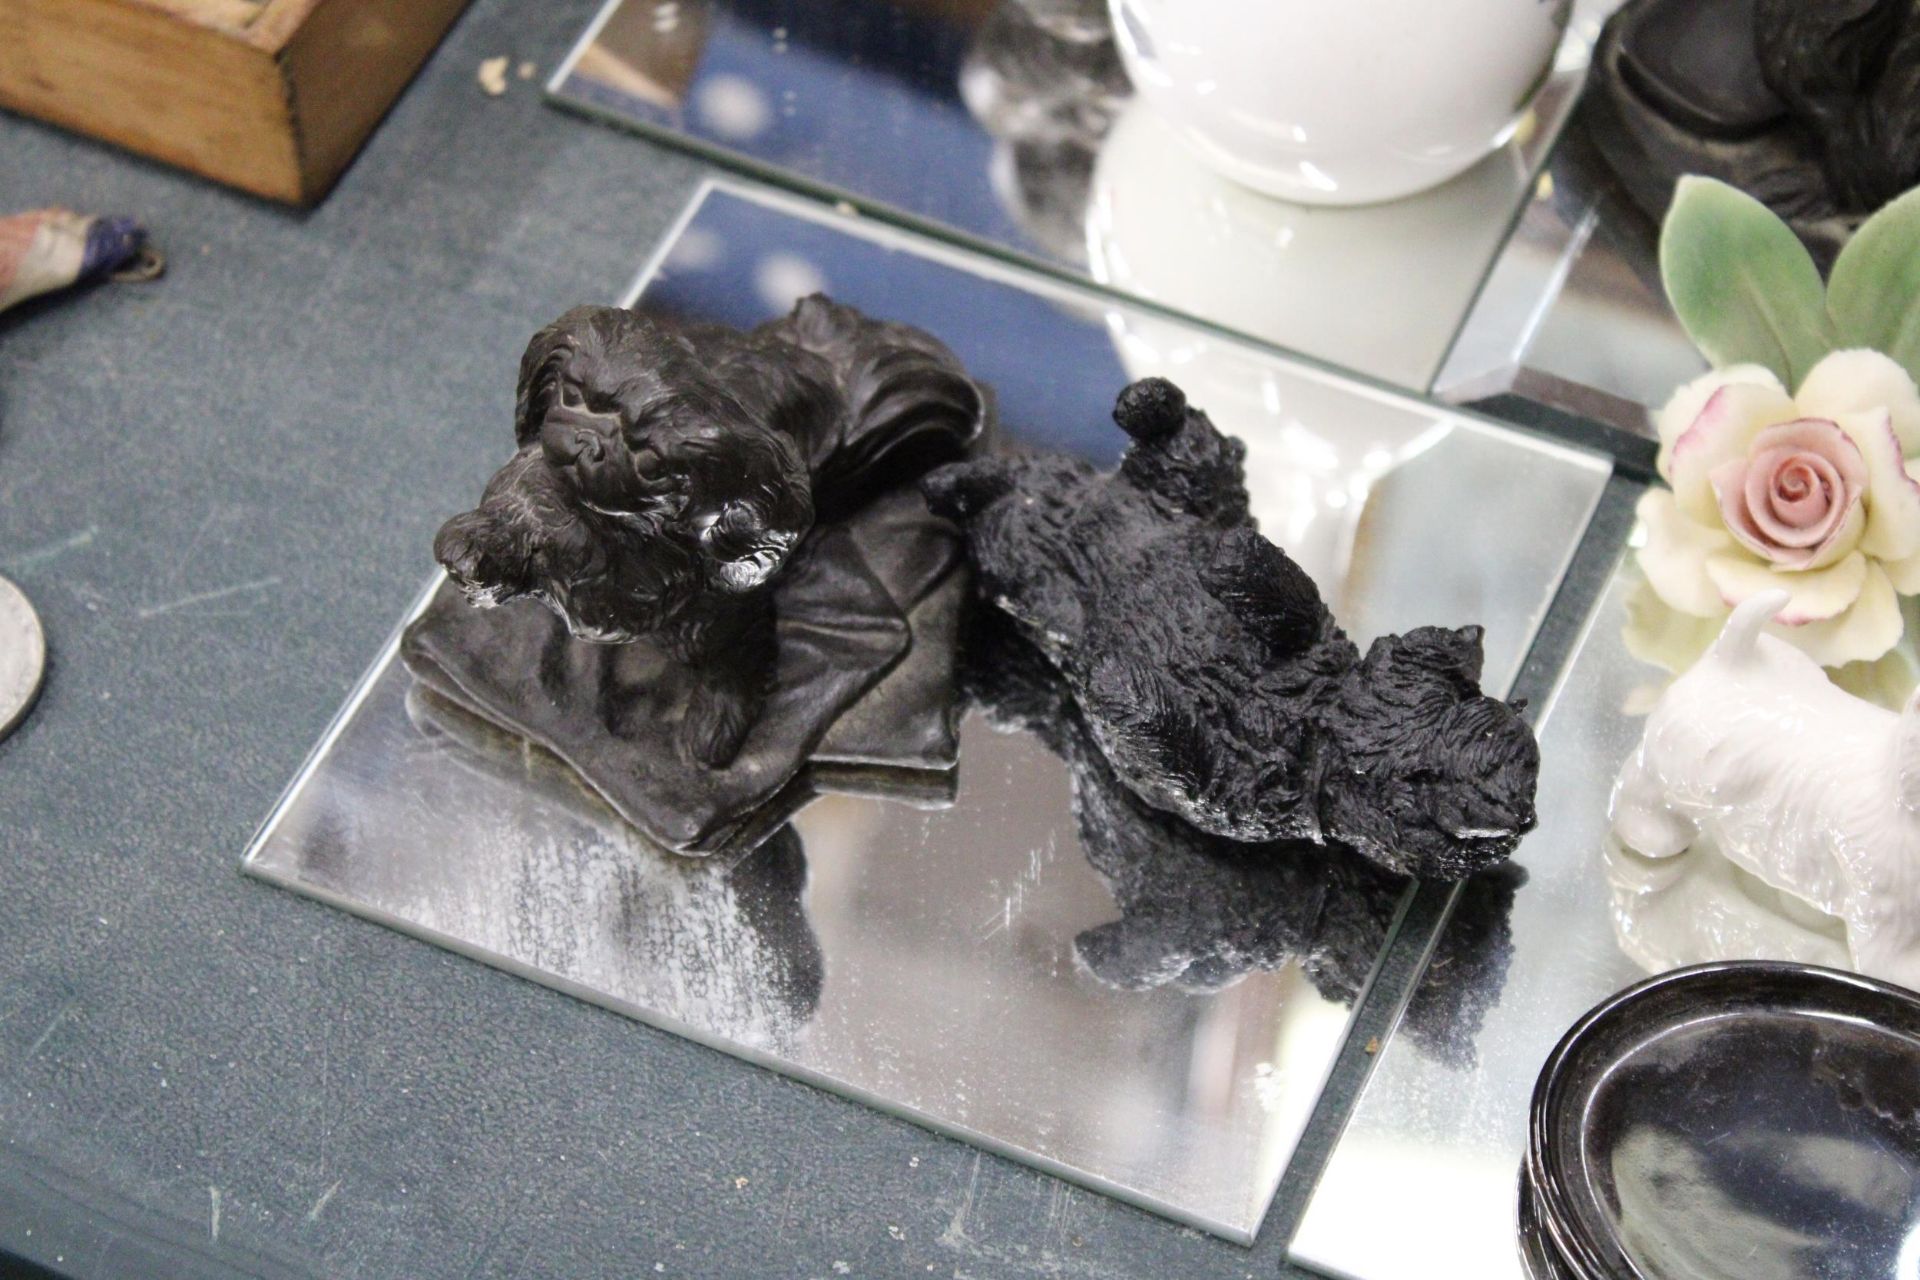 A QUANTITY OF ITEMS TO INCLUDE DOG FIGURES, A SCOTTIE DOG SALT AND PEPPER SET, CERAMIC ROSES, A - Image 5 of 5